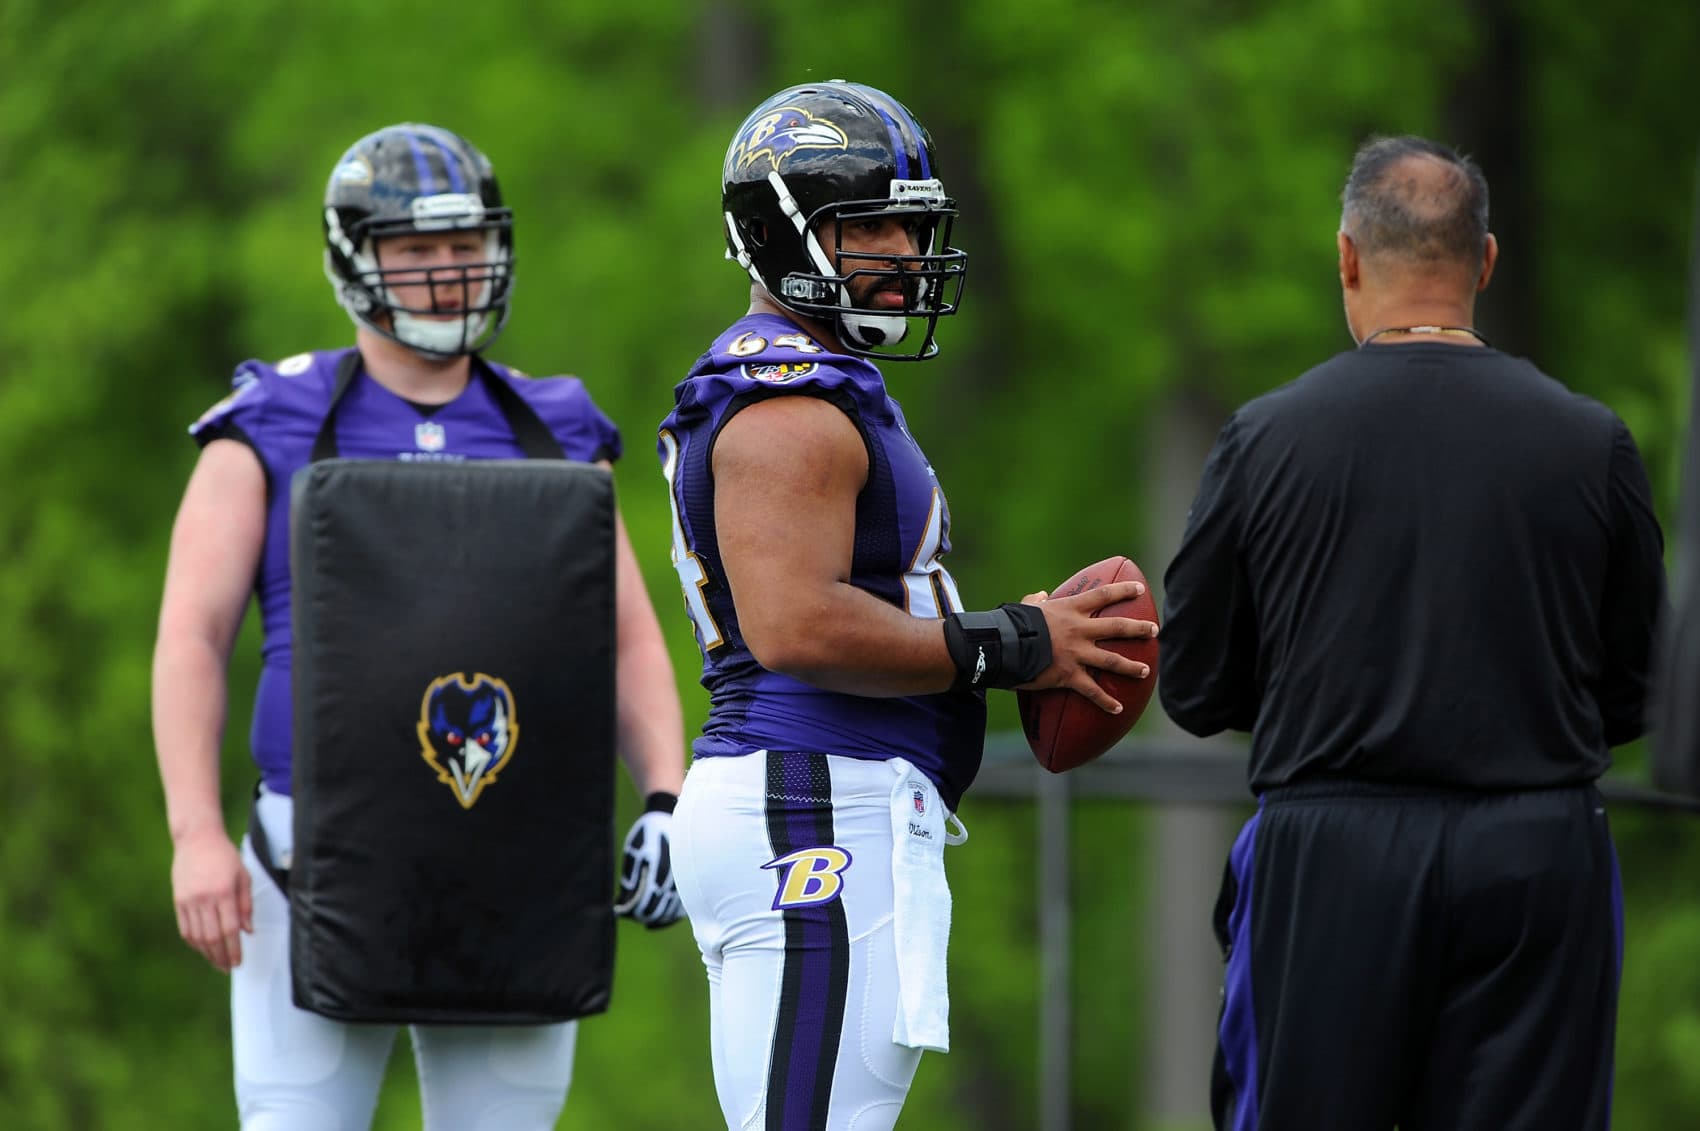 Urschel at the Ravens' rookie minicamp in 2014. (Larry French/Getty Images)